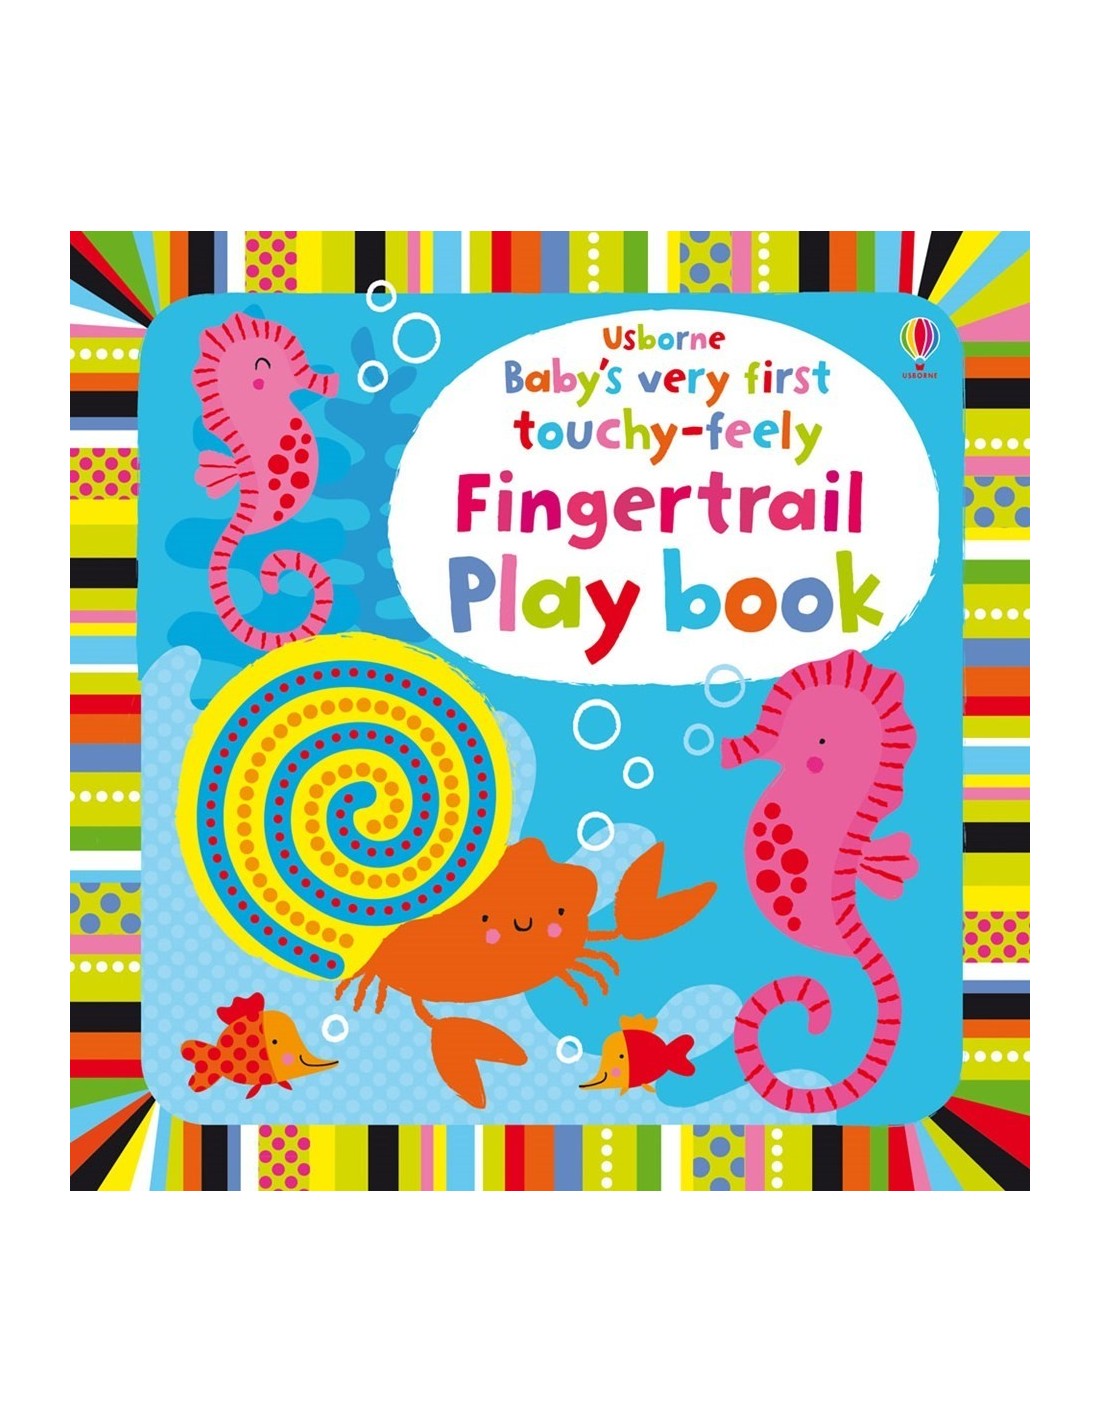 Baby's very first touchy-feely fingertrail play book